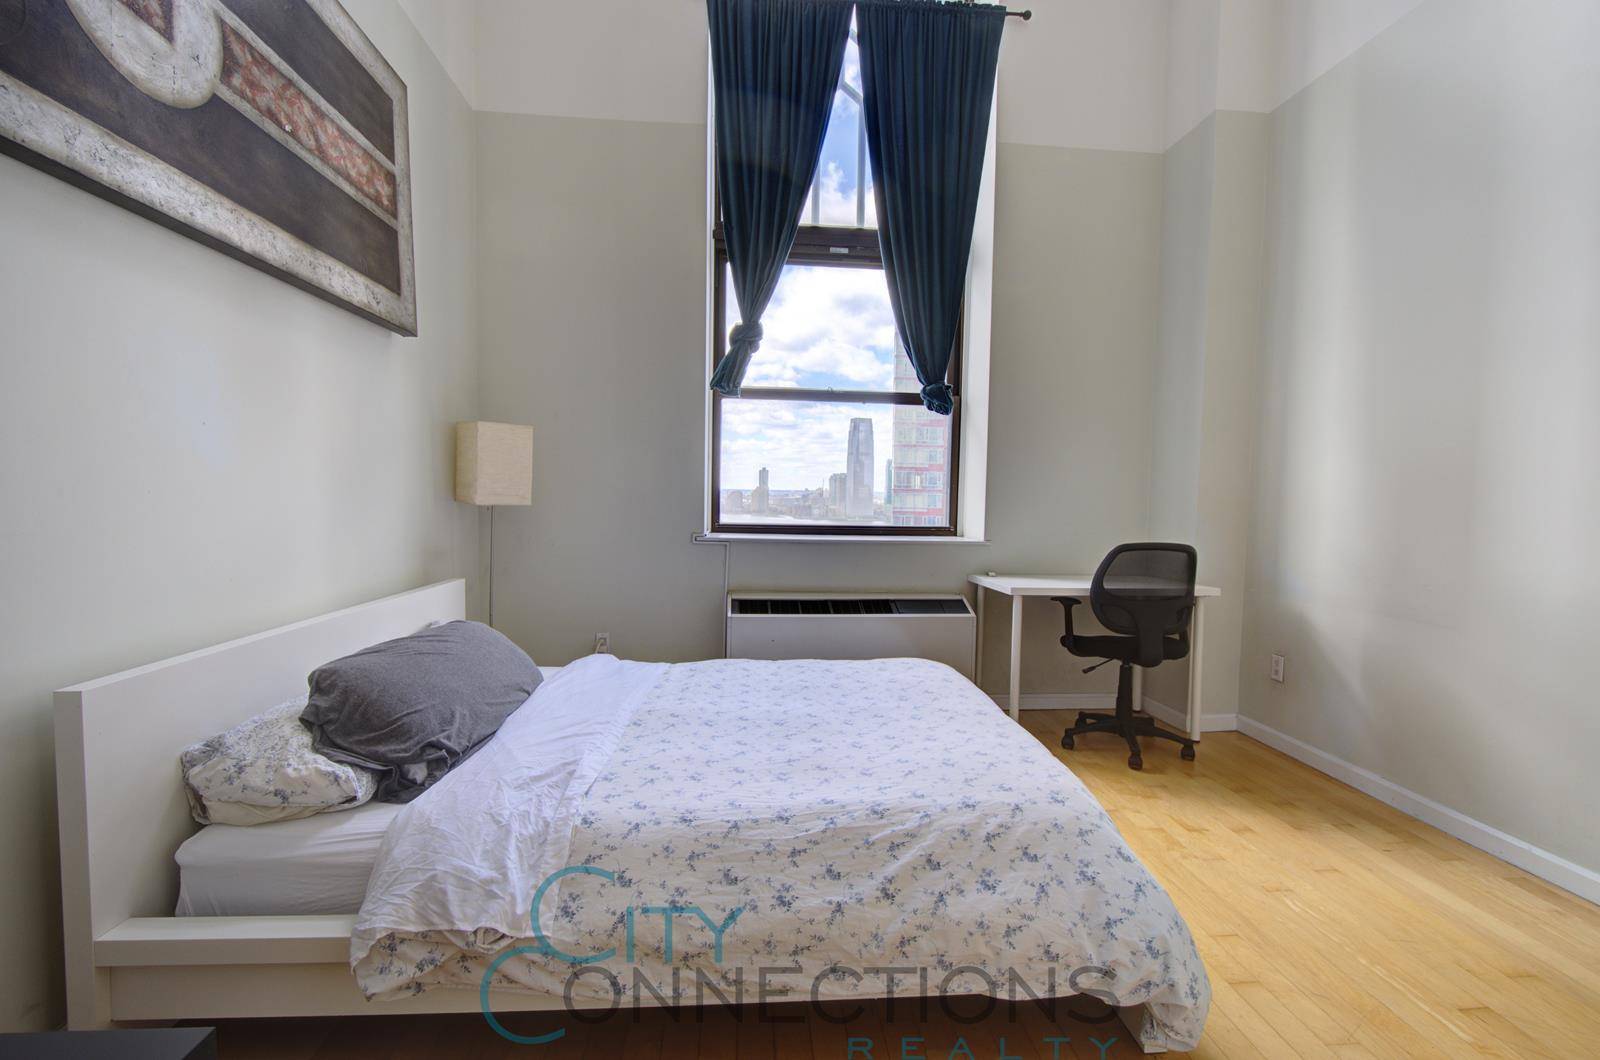 Available FURNISHED or UNFURNISHED 12 MONTH RENTAL ONLYApartment 19C is unlike any other !